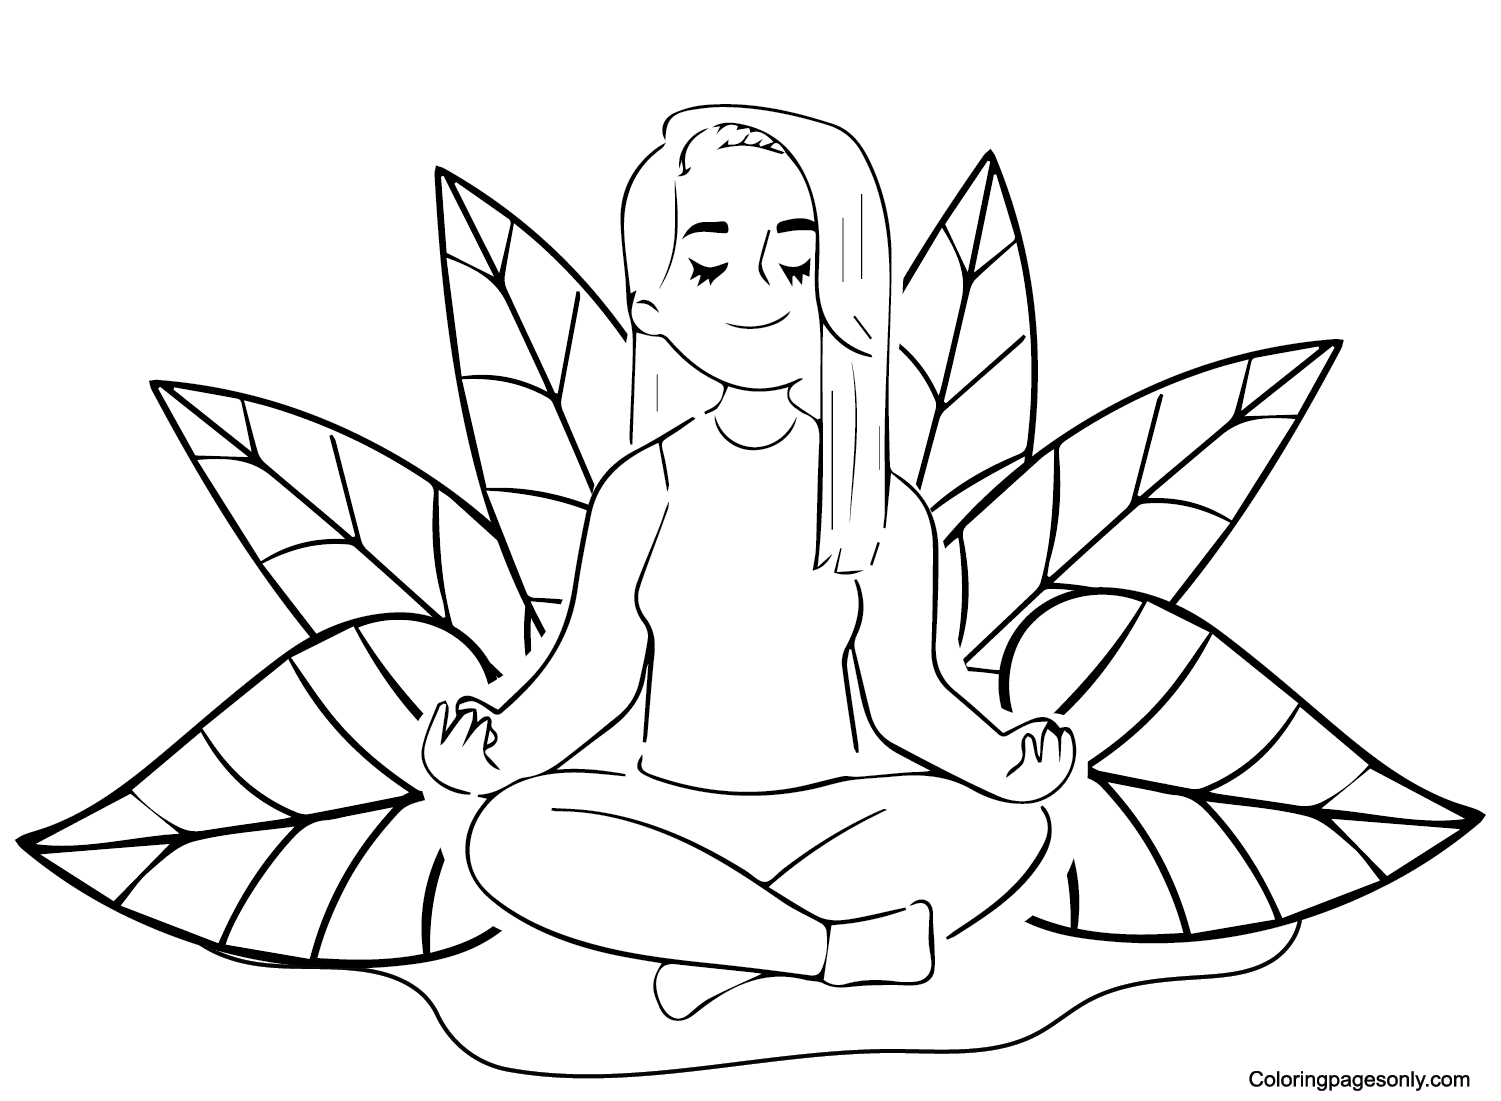 Print Mindfulness Coloring Pages